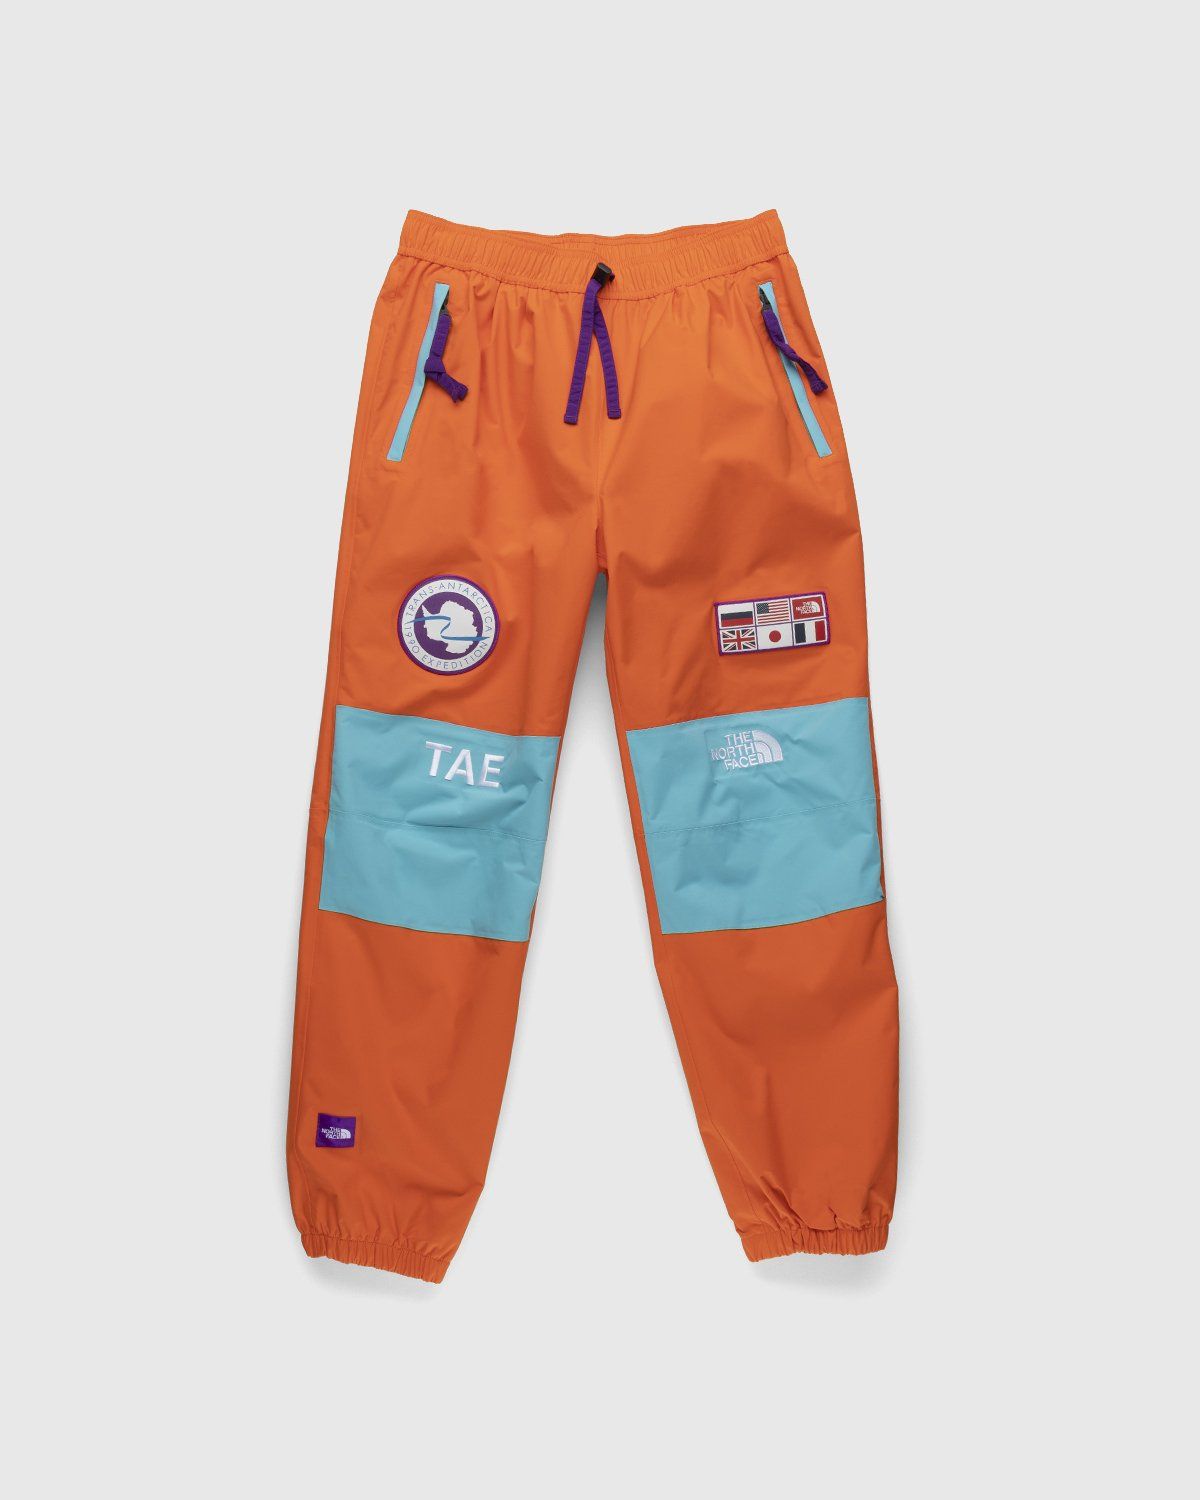 The North Face – Trans Antarctica Expedition Pant Red Orange